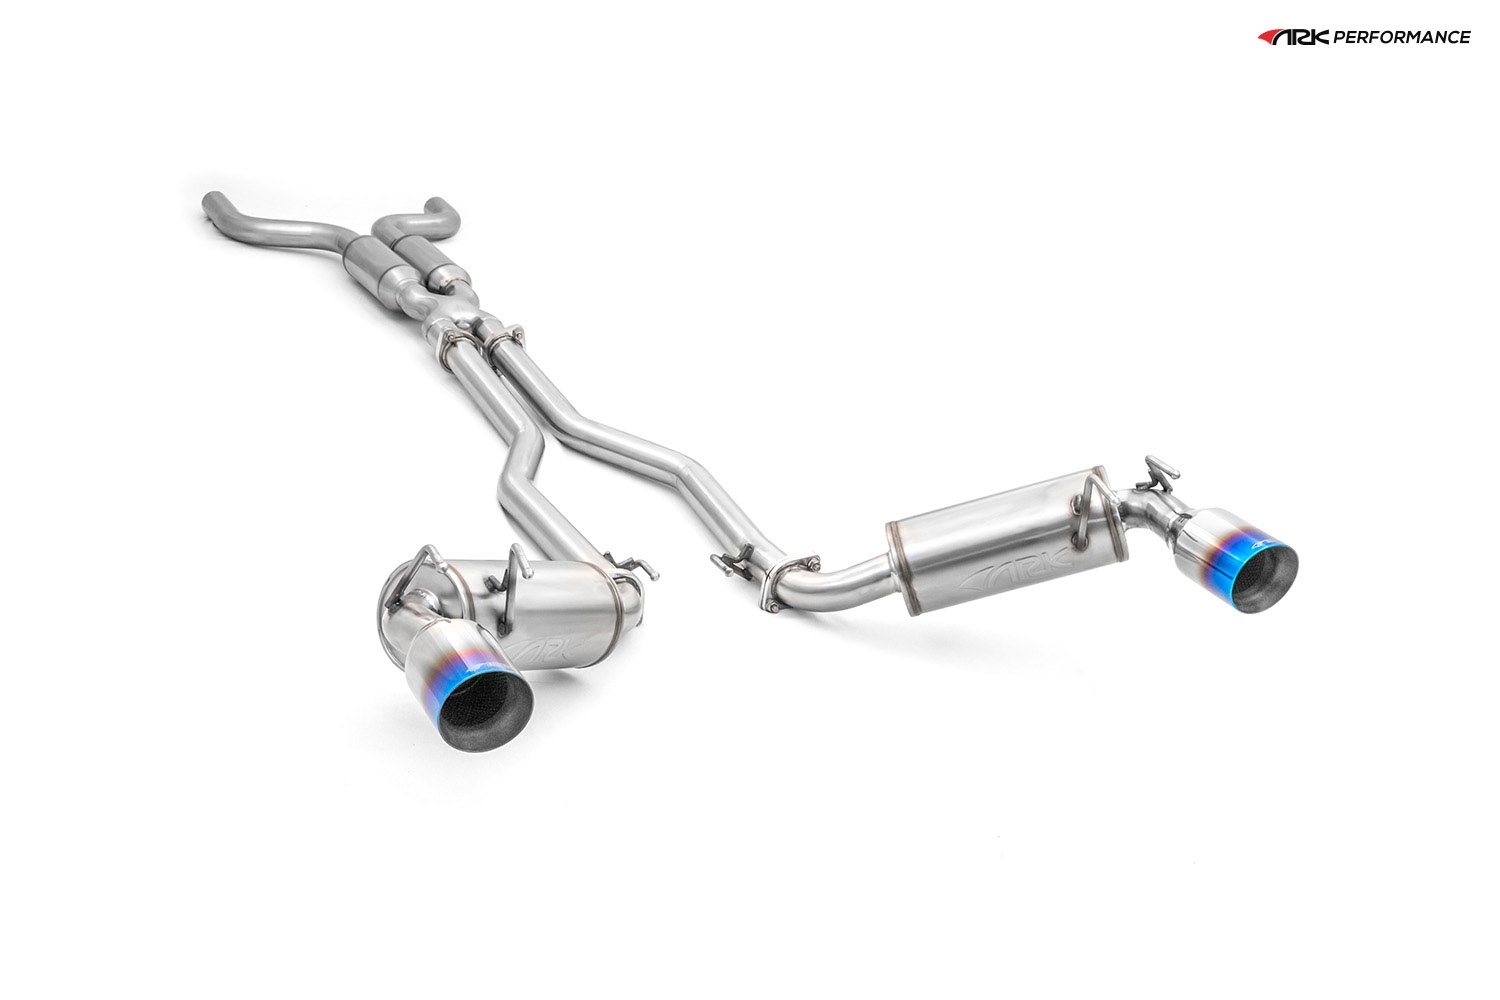 Ark Performance Stainless Steel DT-S Cat-Back Exhaust System 2.5in Pipe w/ 4.5 Burnt Single Tip, Dual Exit - Chevrolet Camaro 10-15 LS3, L99, LLT, LFX 5TH GEN